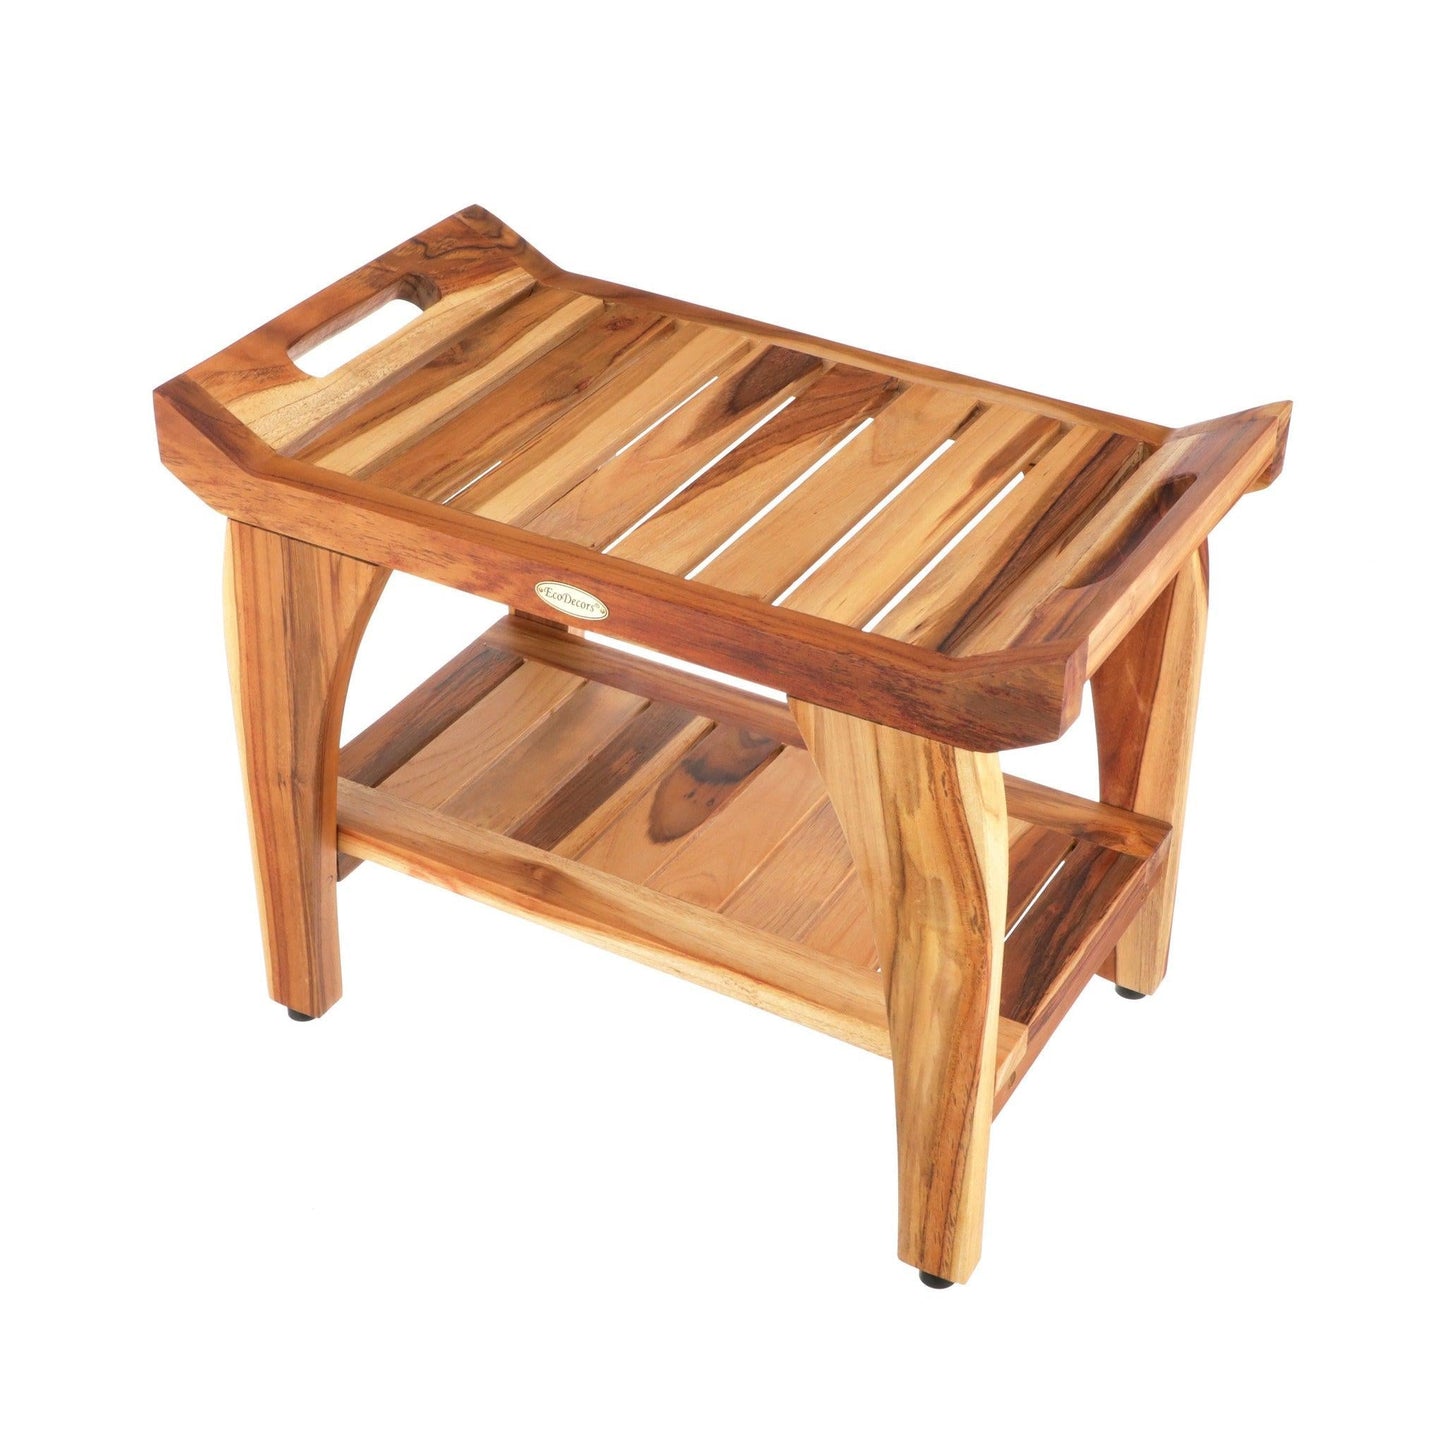 EcoDecors Tranquility 24" EarthyTeak Solid Teak Wood Shower Bench With Shelf and LiftAide Arms